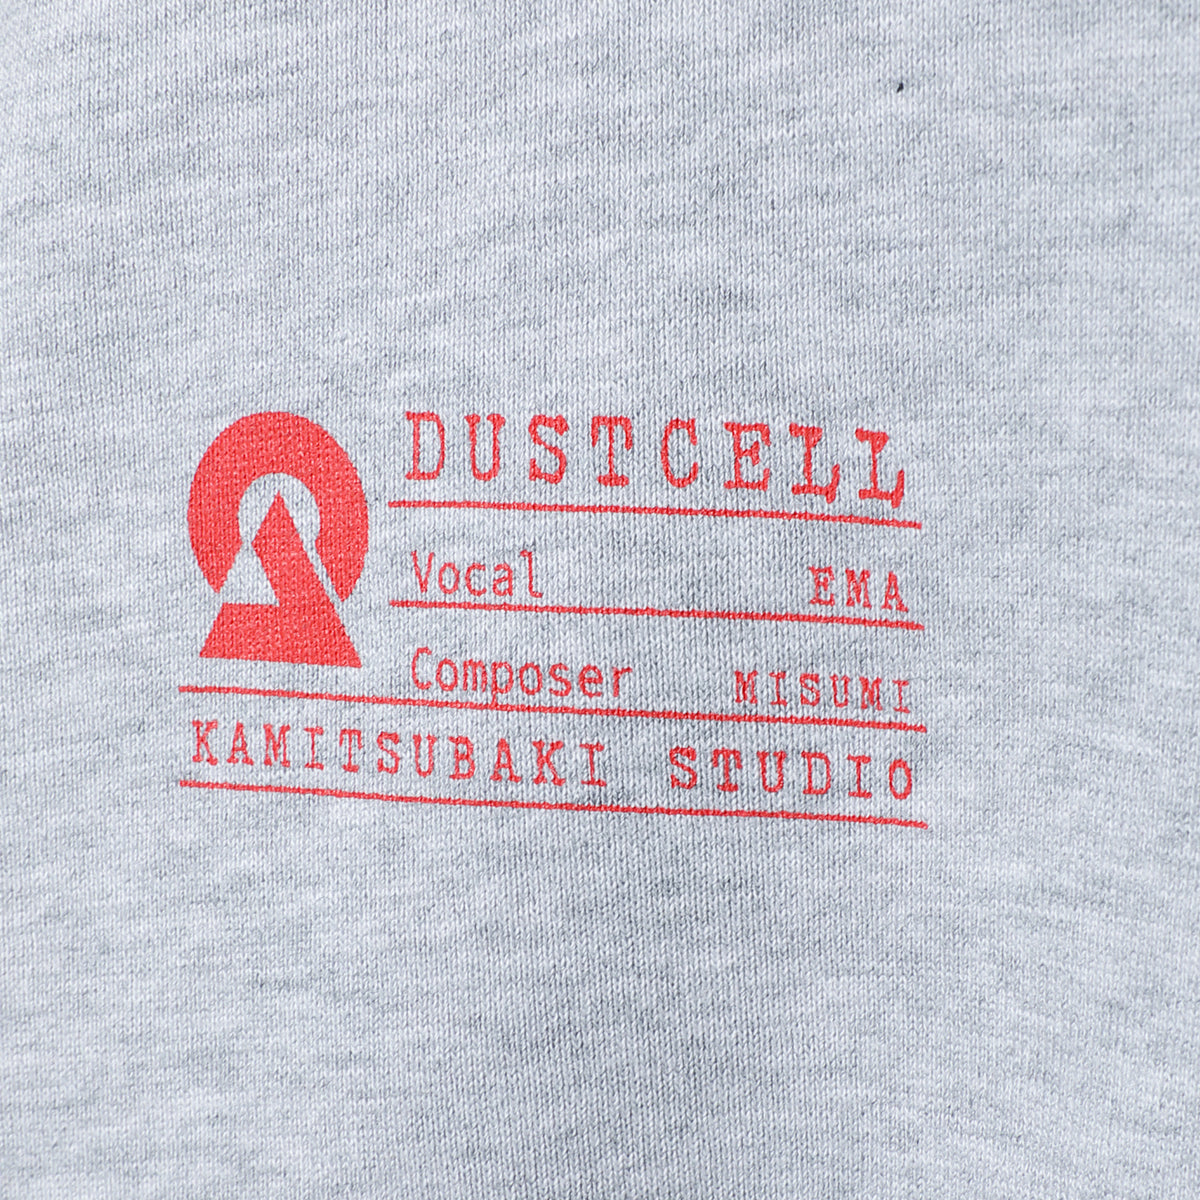 【DUSTCELL】ネームパーカー／GRAY／DUSTCELL Exhibiton「白炎」